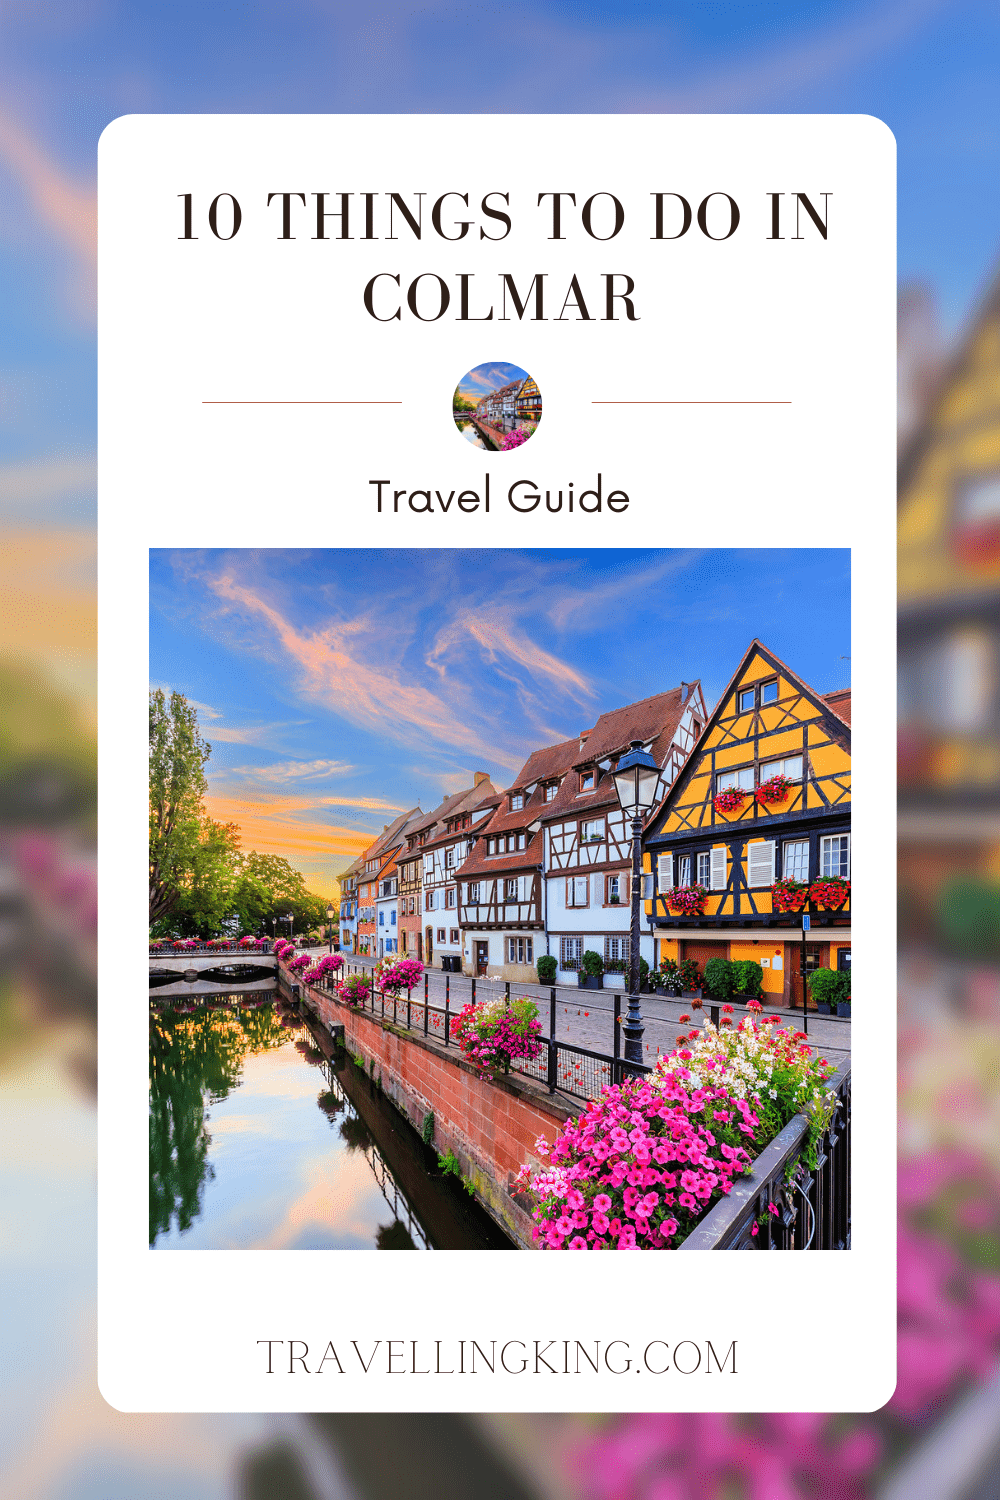 10 Things to do in Colmar